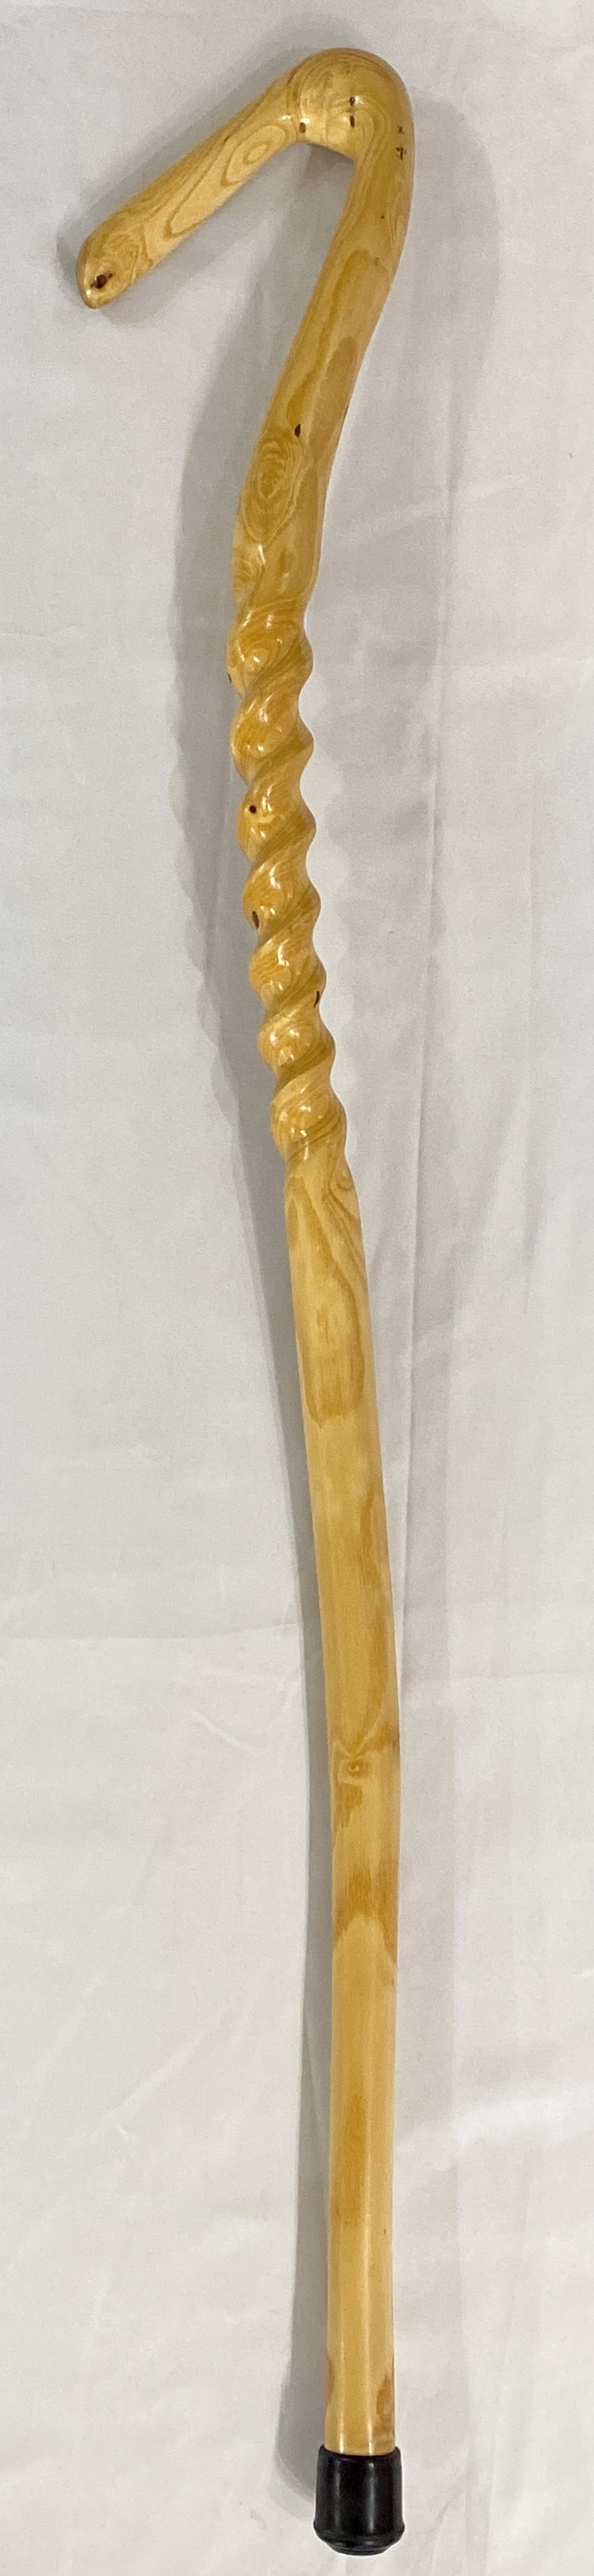 Wooden Walking Stick #9 by Kevin Foote